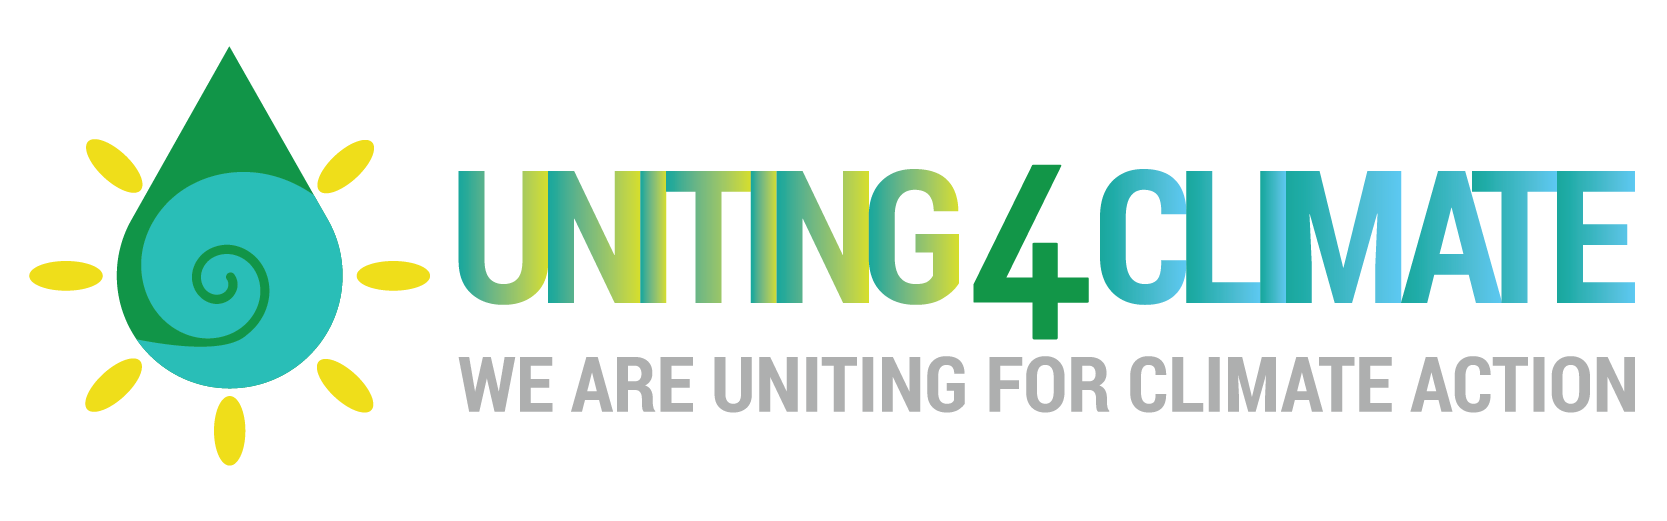 Uniting4Climate